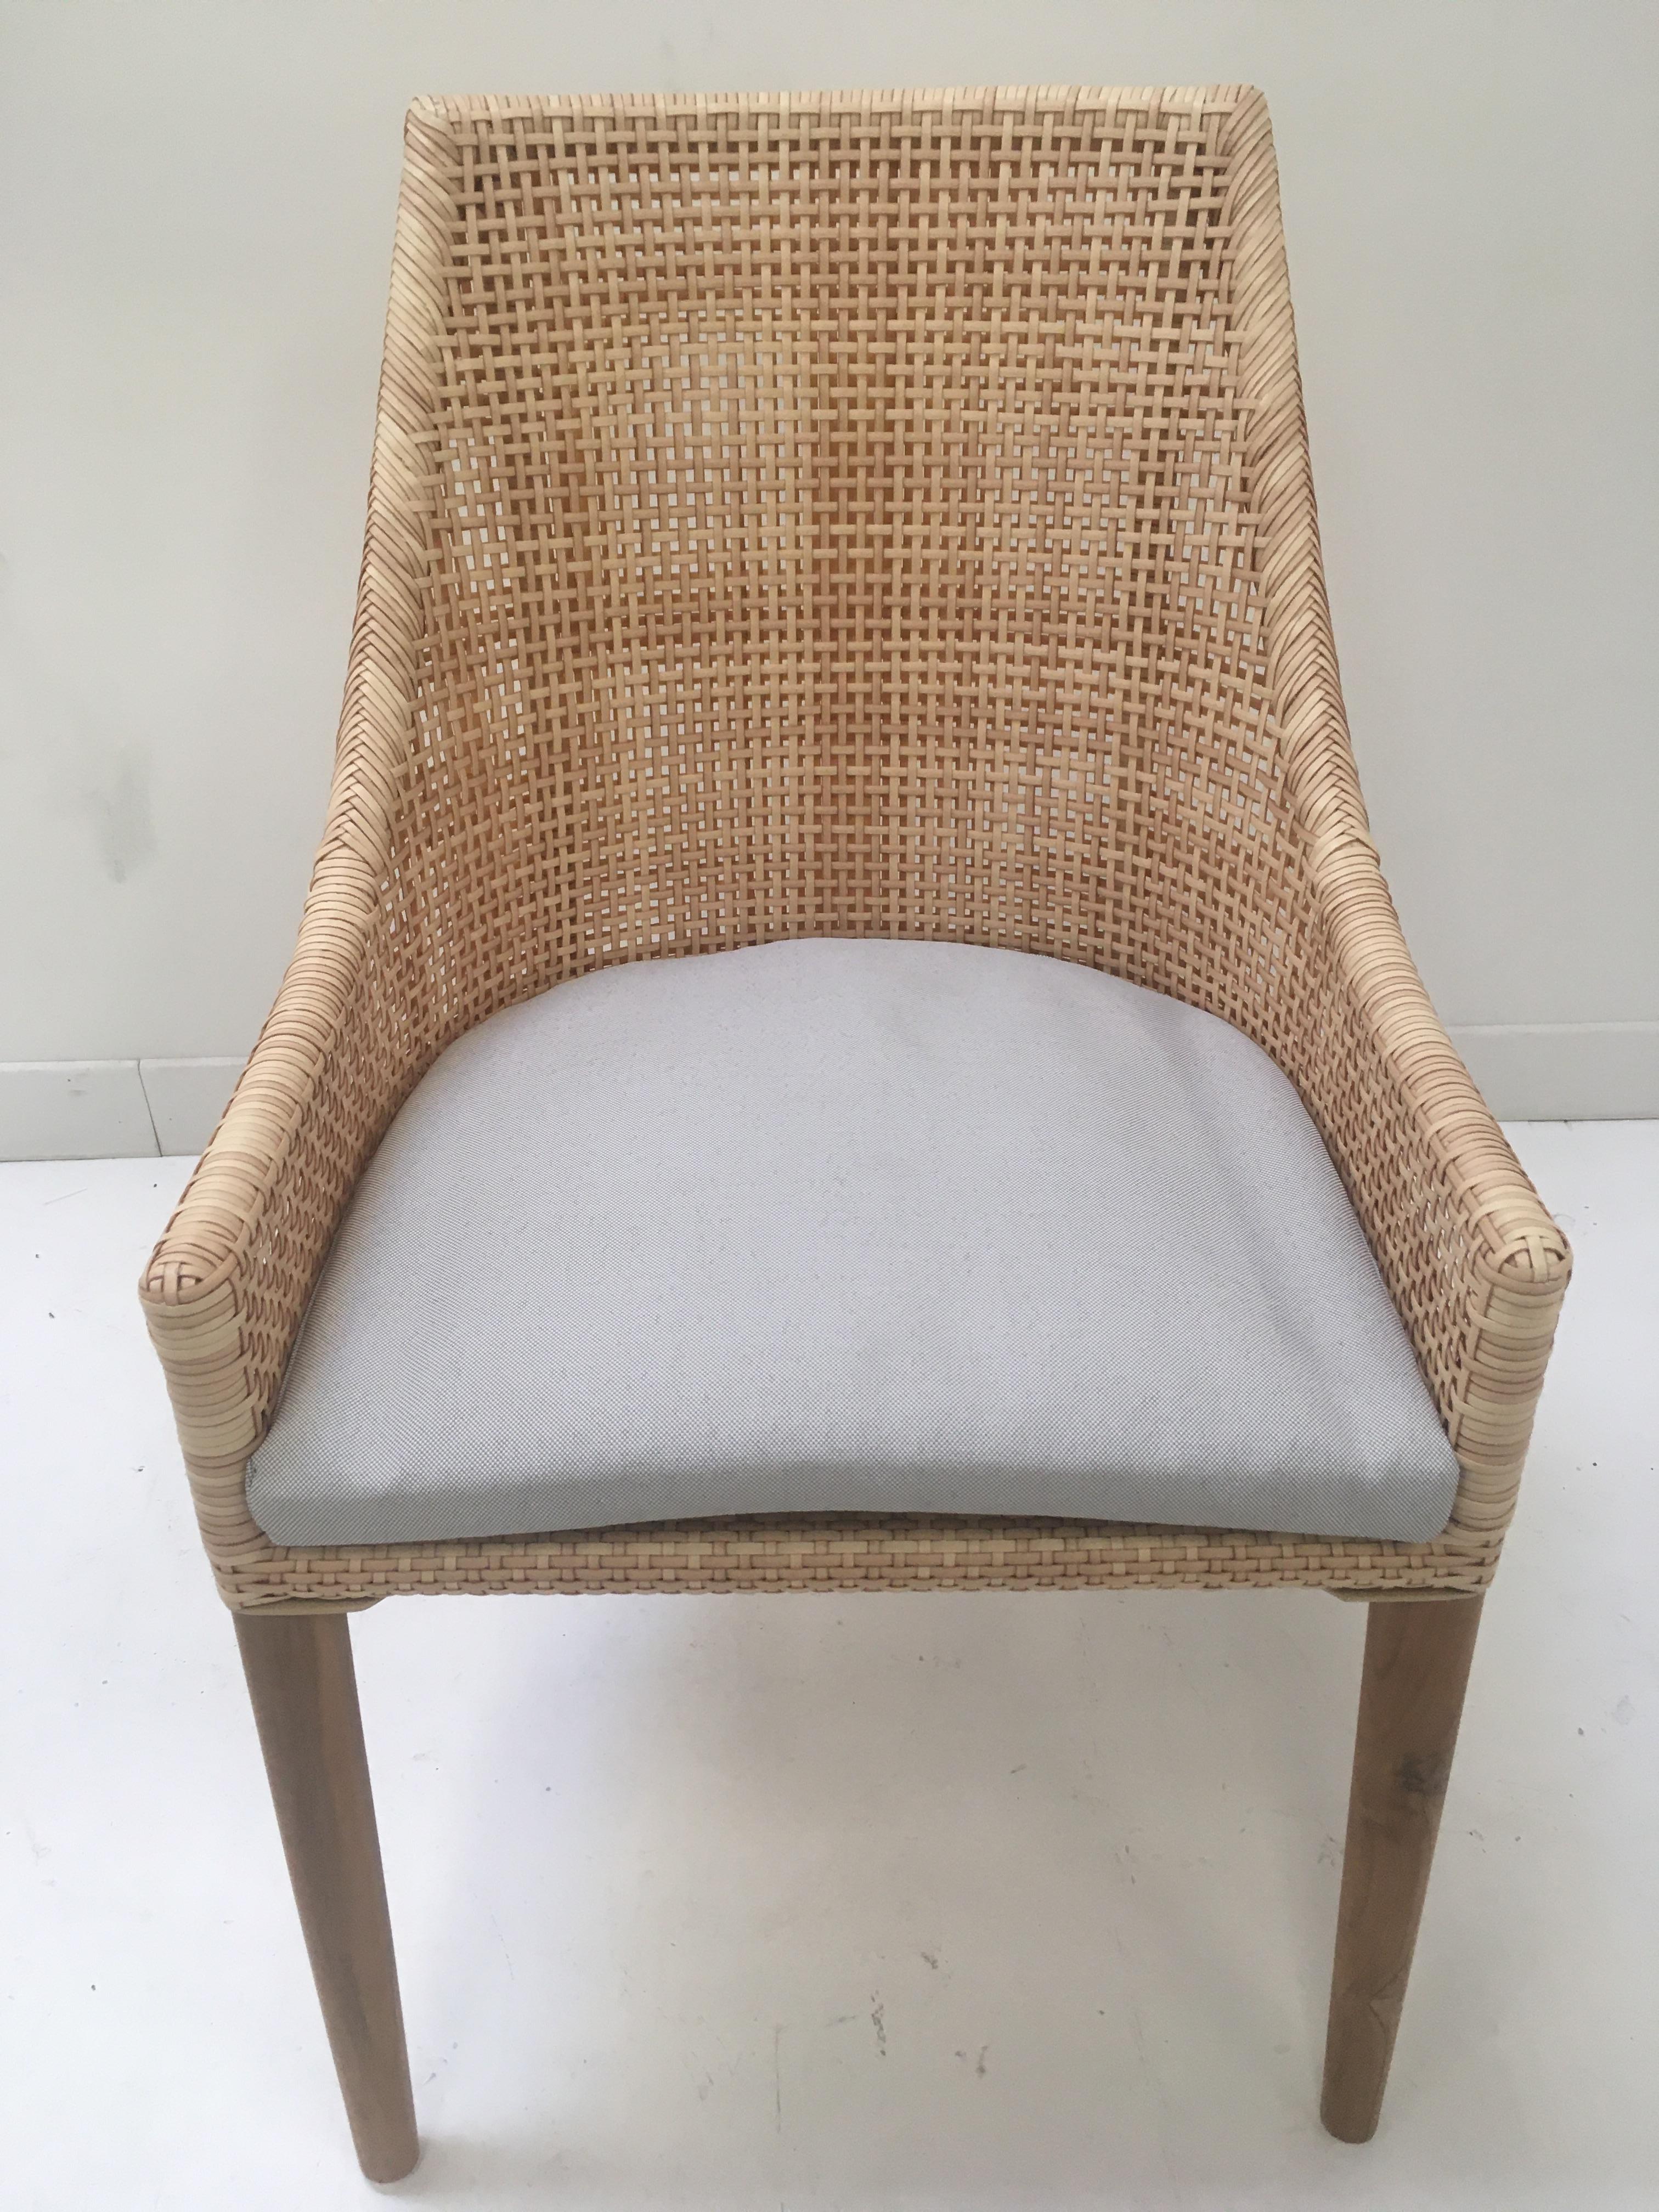 Handcrafted Braided Resin Rattan Effect and Teak Wooden Outdoor Chair For Sale 3